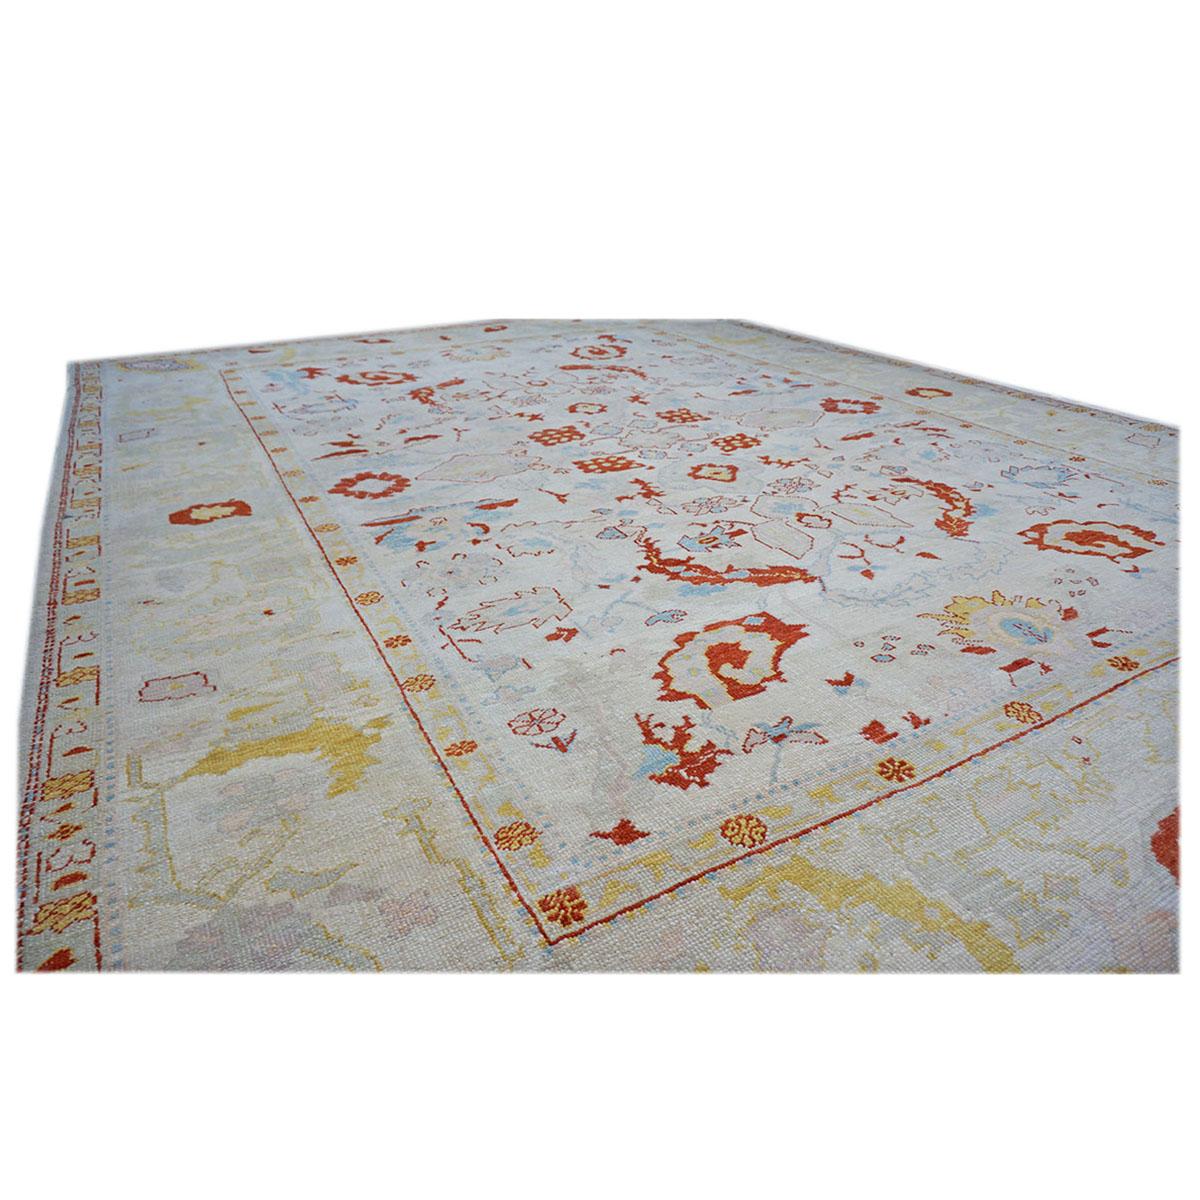 21st Century Turkish Oushak 9x12 Ivory, Rust & Light Blue Wool Area Rug In Excellent Condition For Sale In Houston, TX